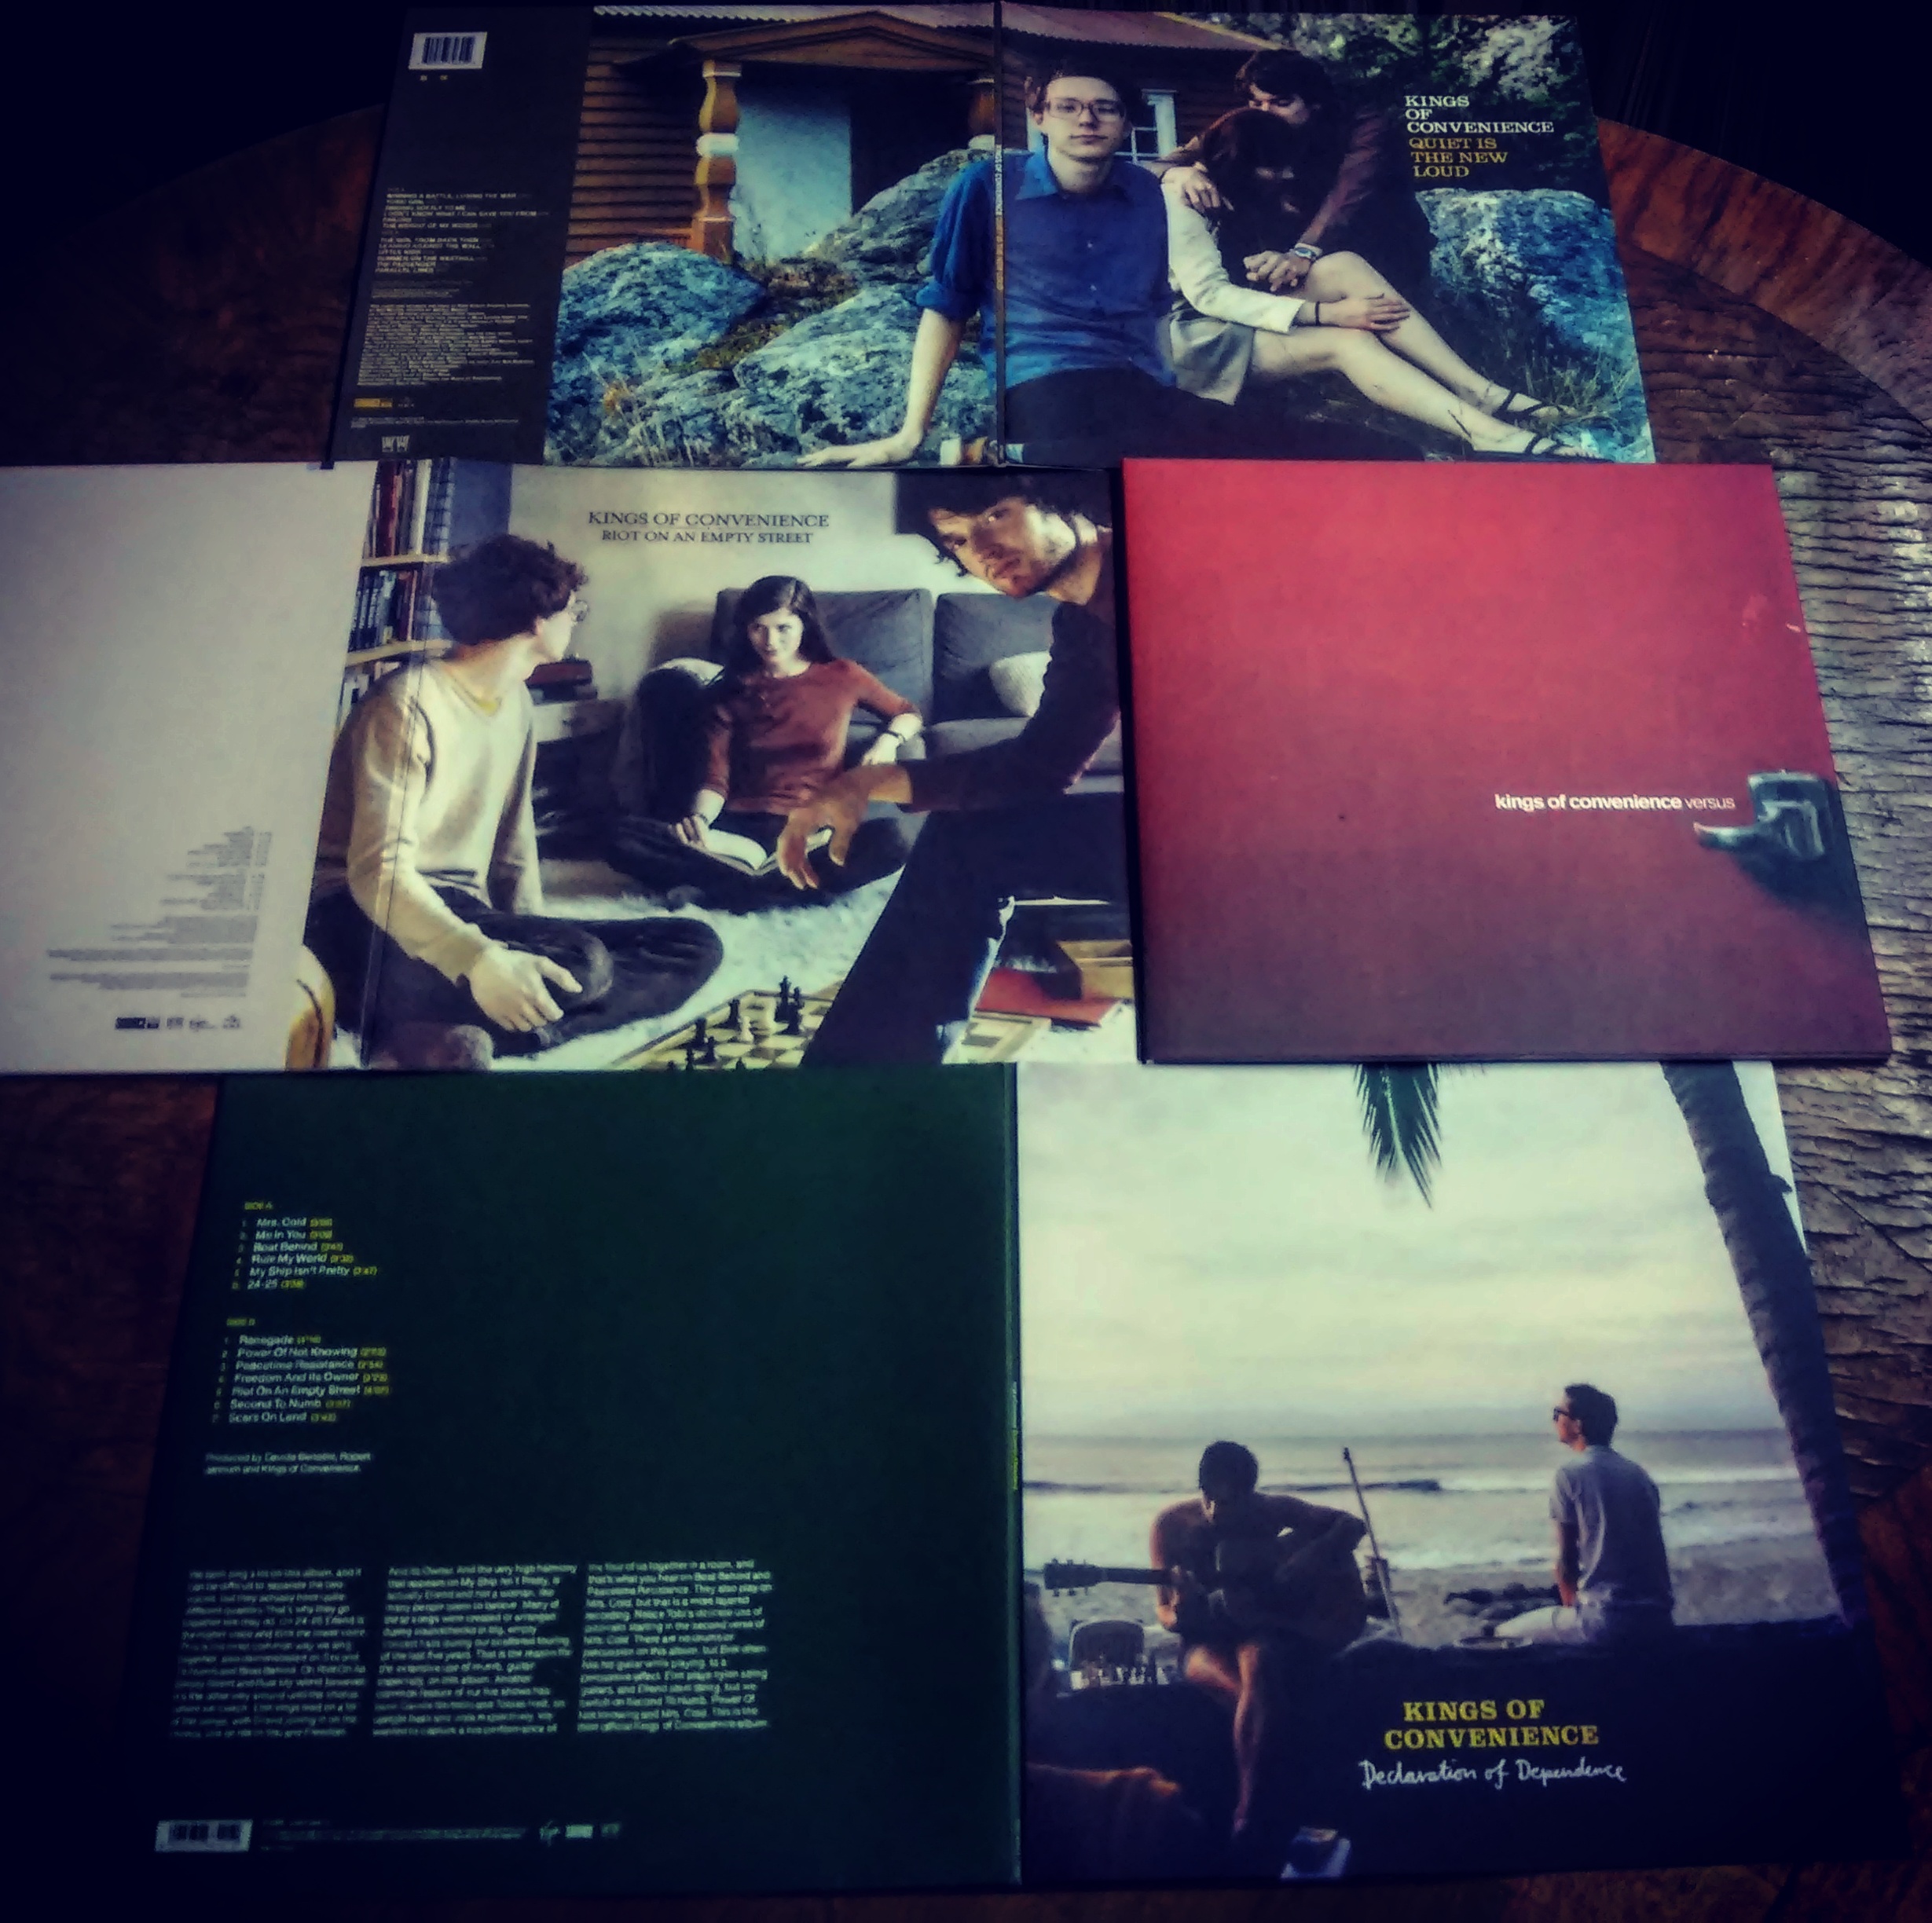 Kings of Convenience LPs - at the home base of BBD